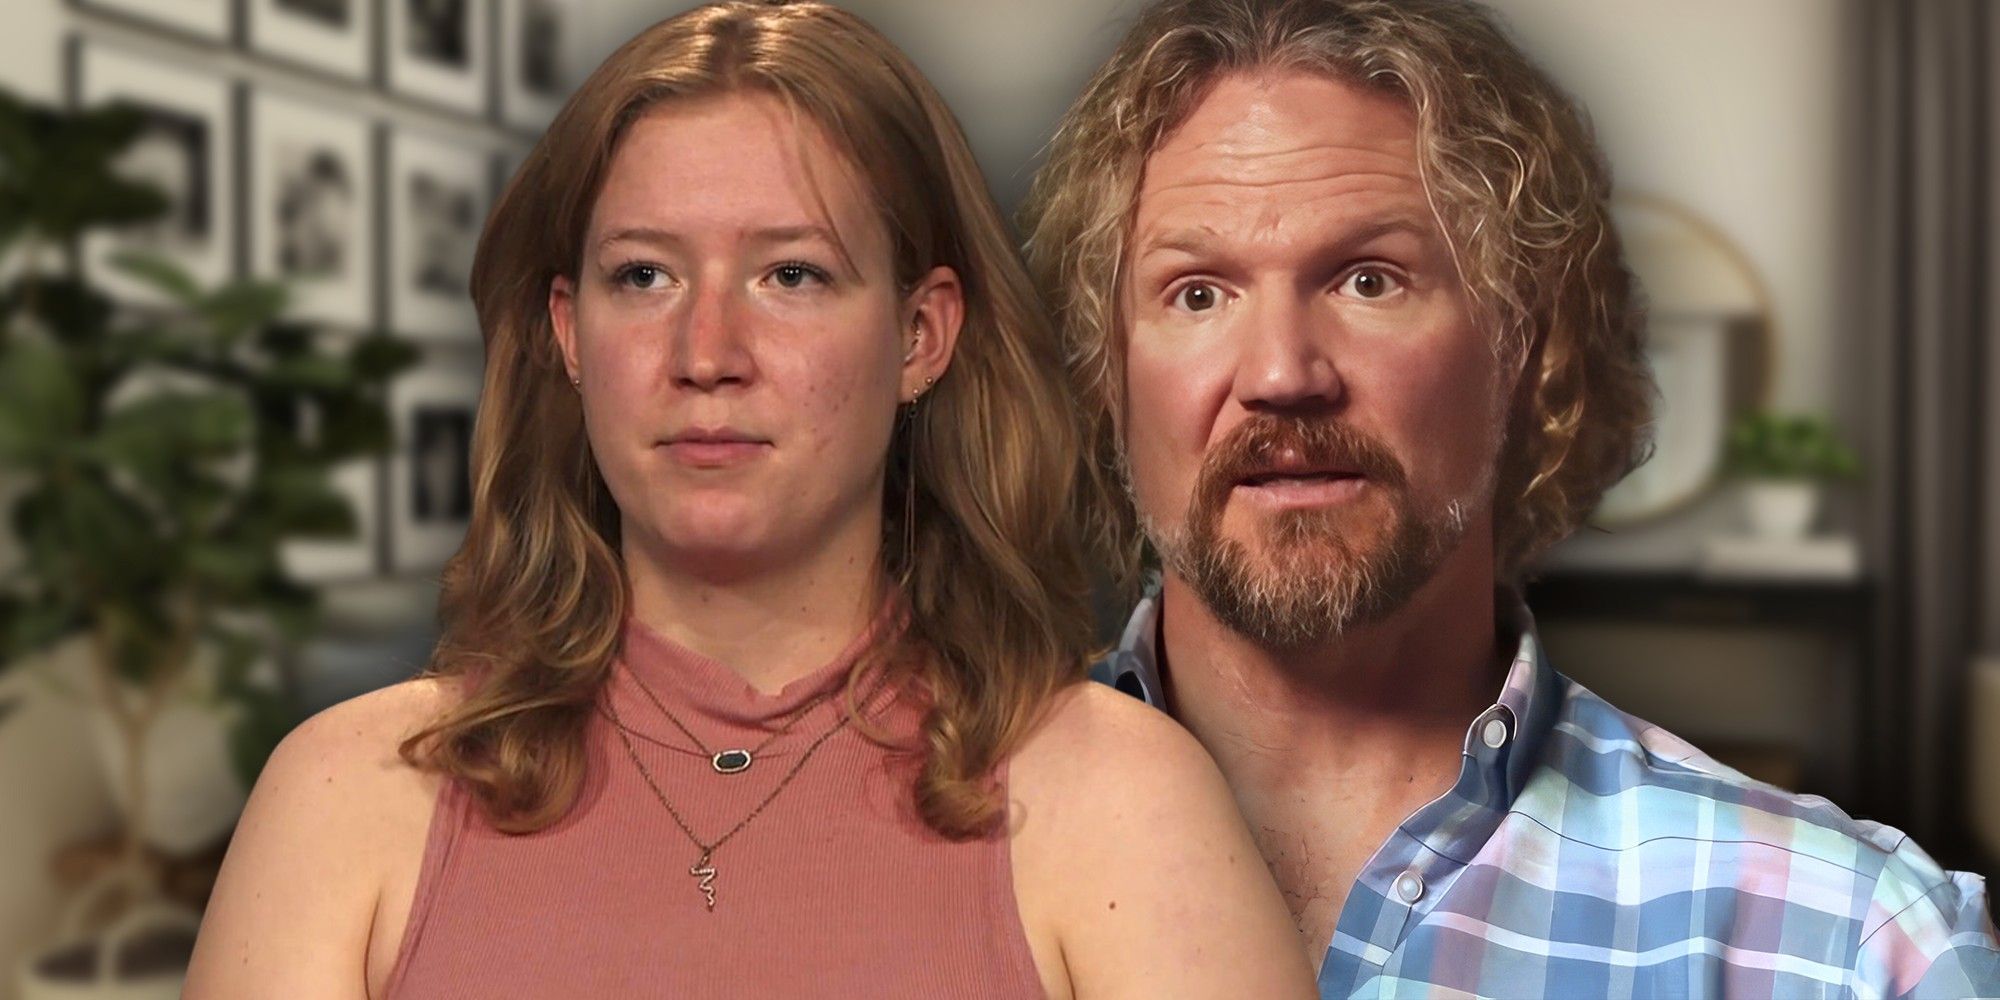 Gwen and Kody Brown from Sister Wives looking serious